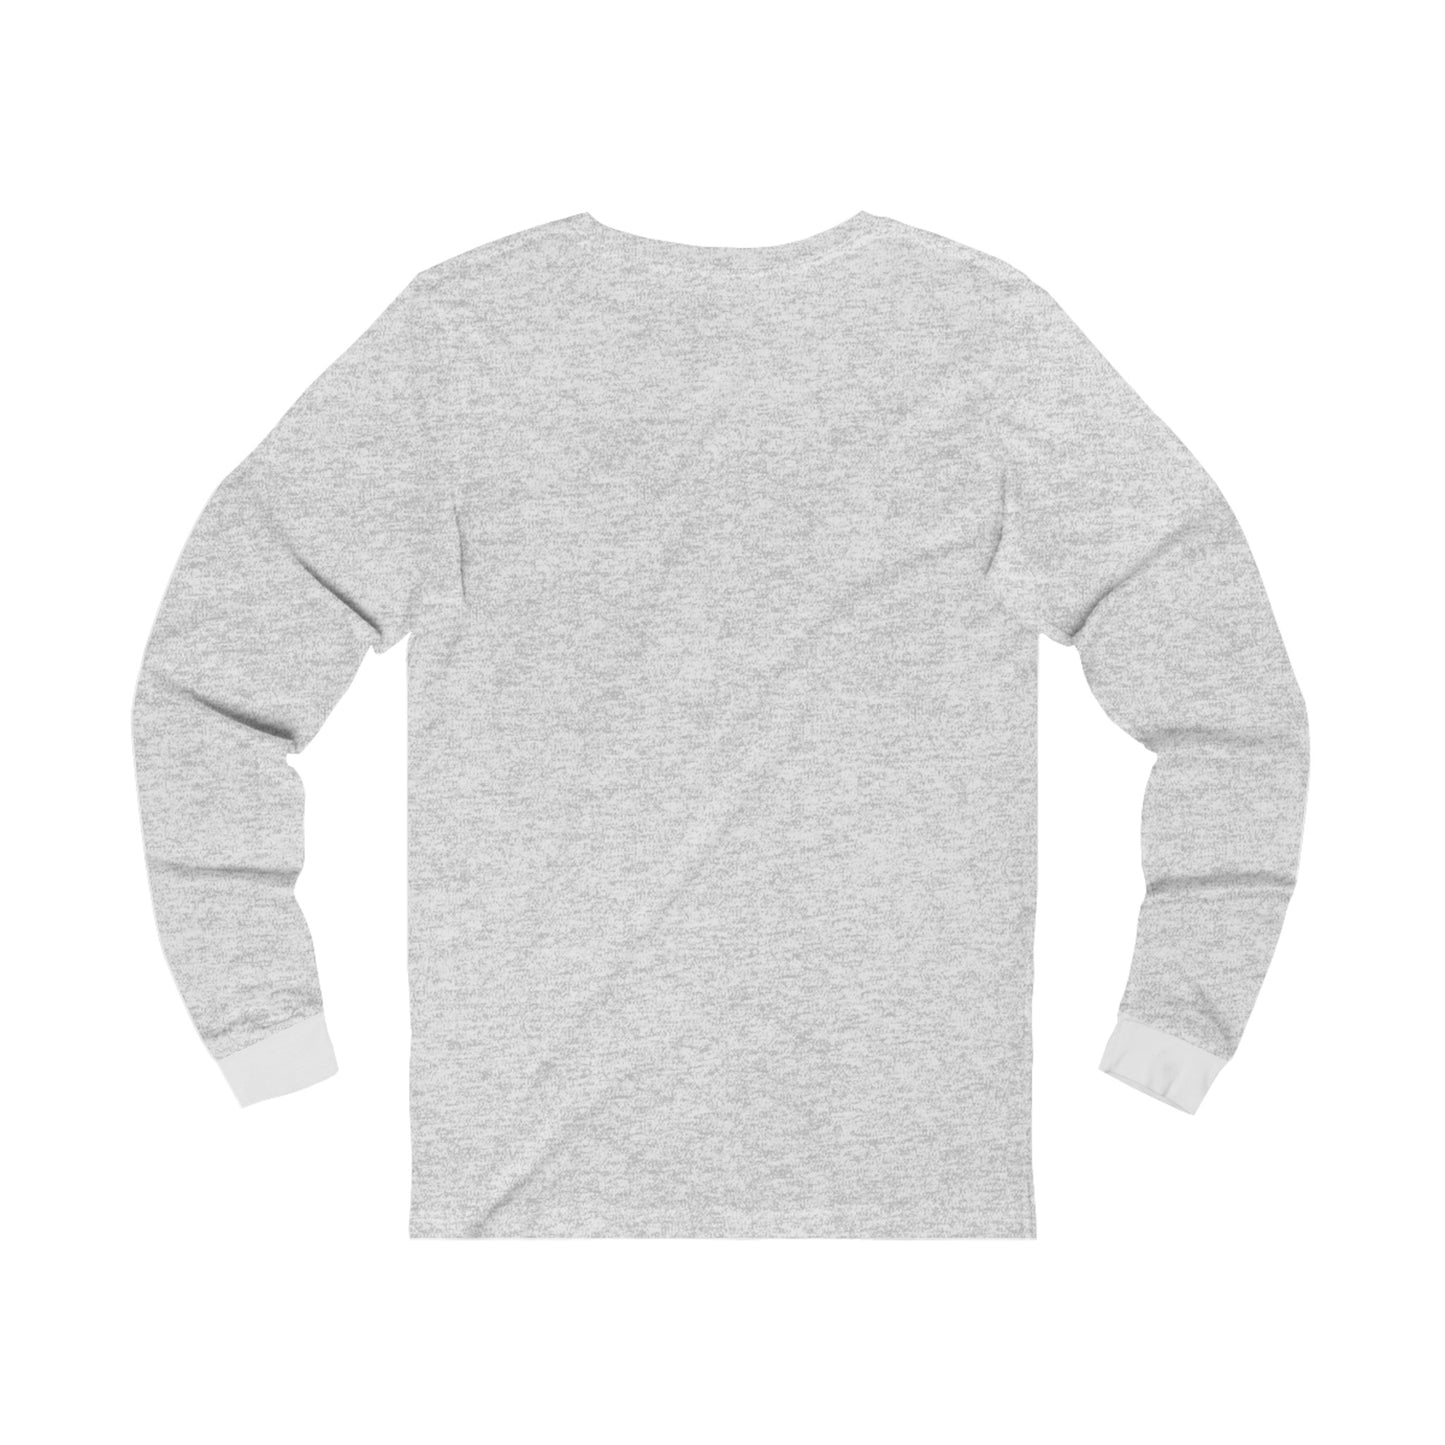 Easy Does It Unisex Jersey Long Sleeve Tee, #pleasantlot Design t-shirts